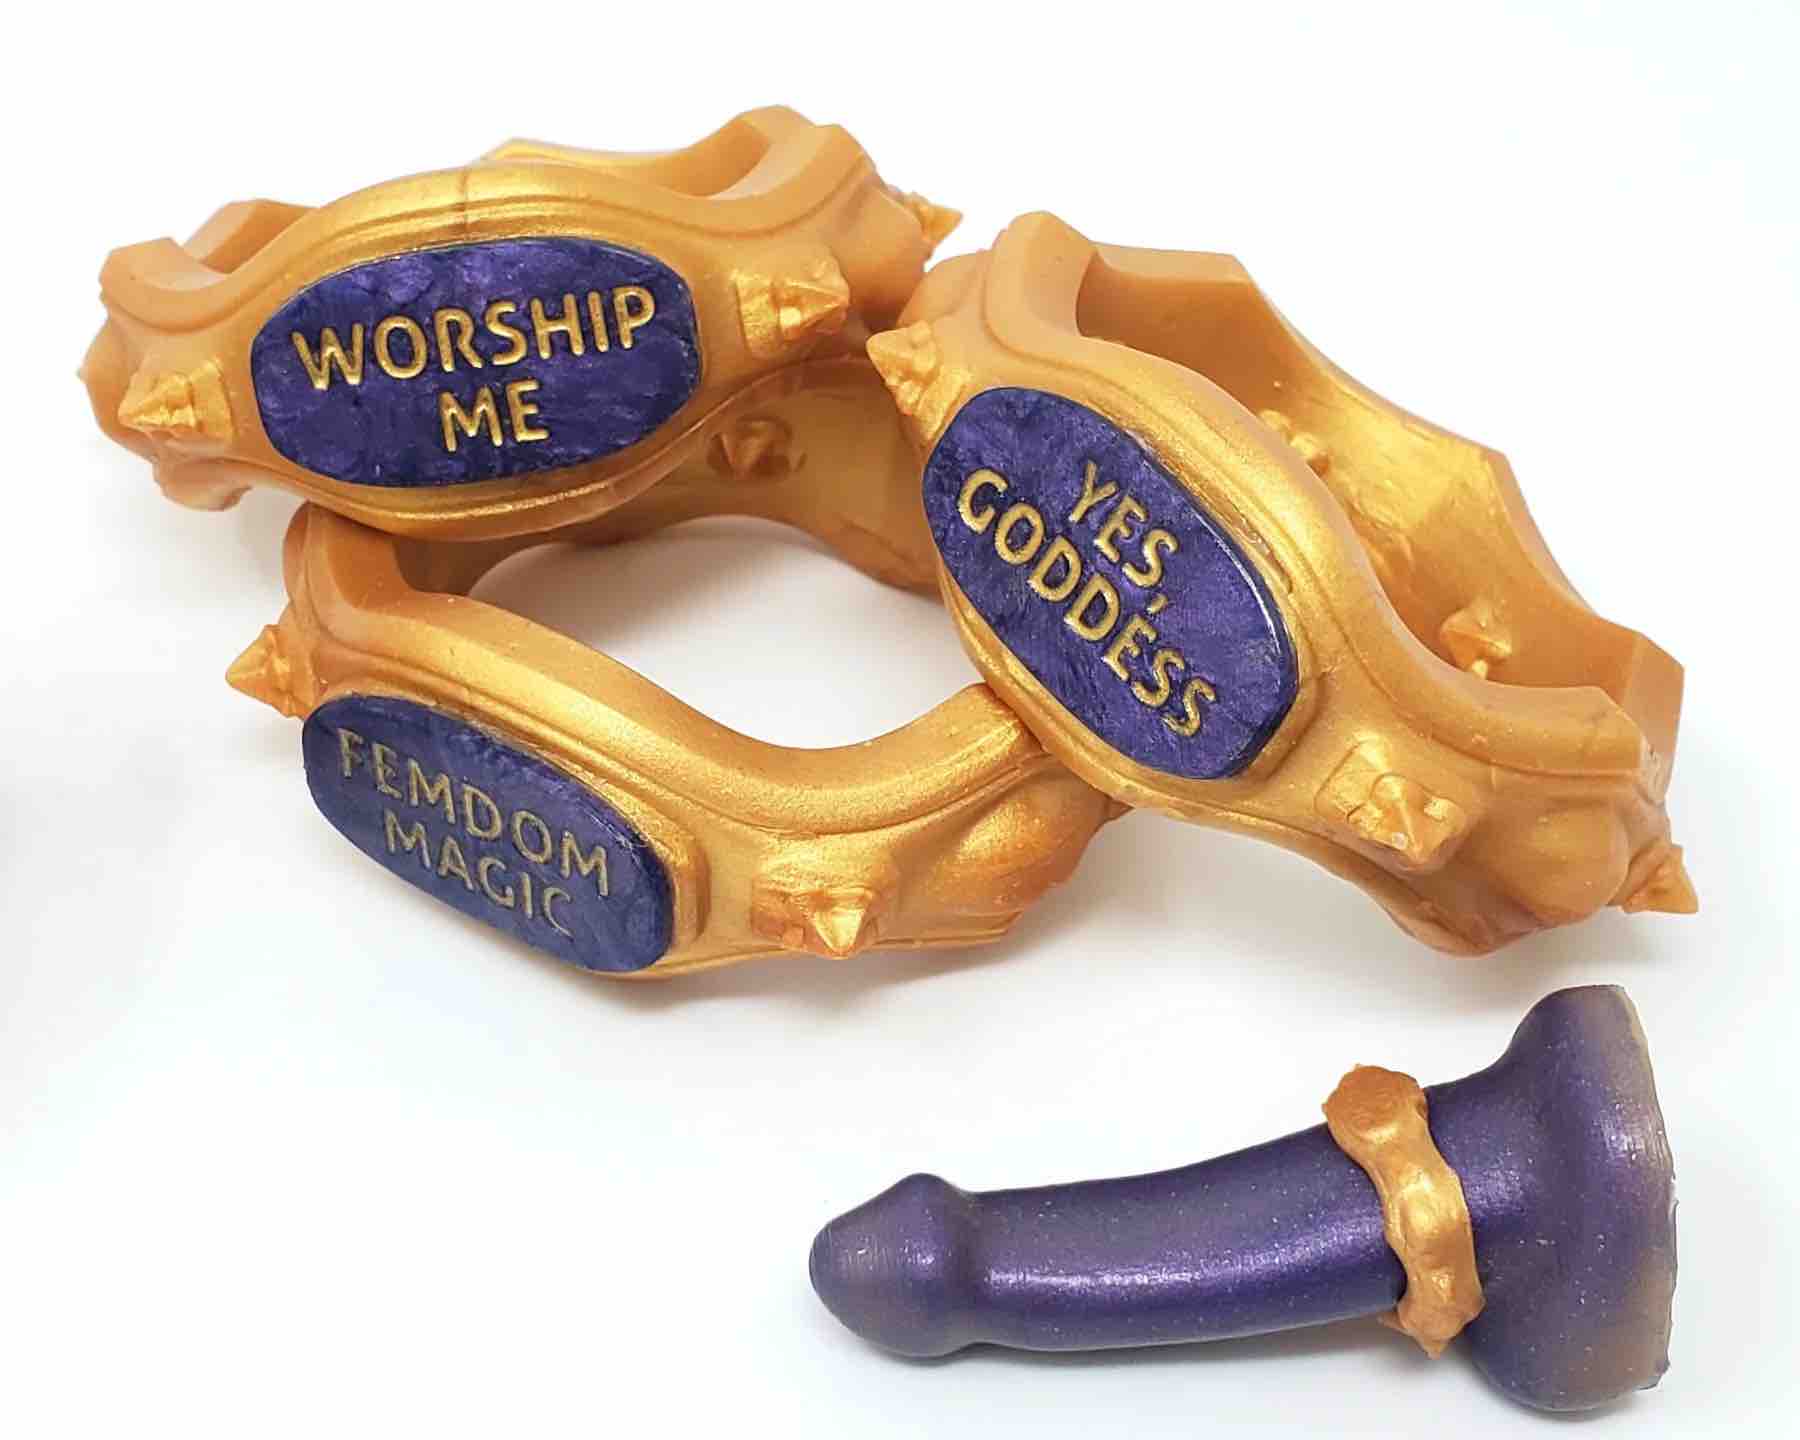 Three Royal Fetish FEMDOM Edging Body Bands with different messages along with a purple dildo with a body band on it.